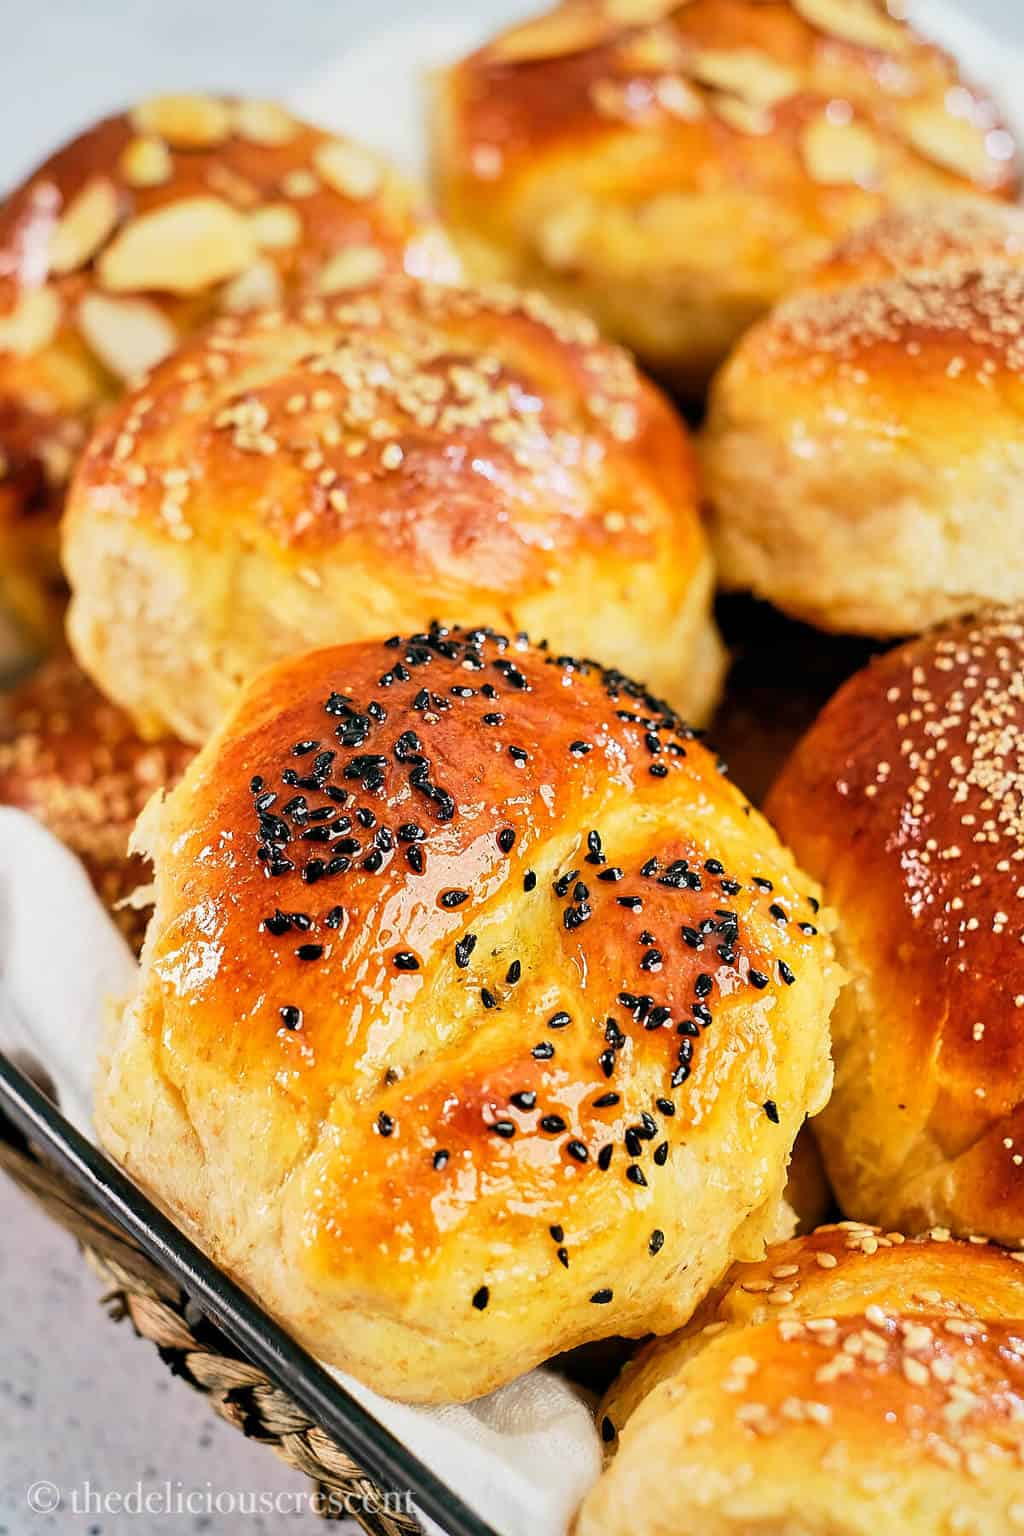 Soft honey wheat rolls topped with a variety of seeds and arranged in a basket.